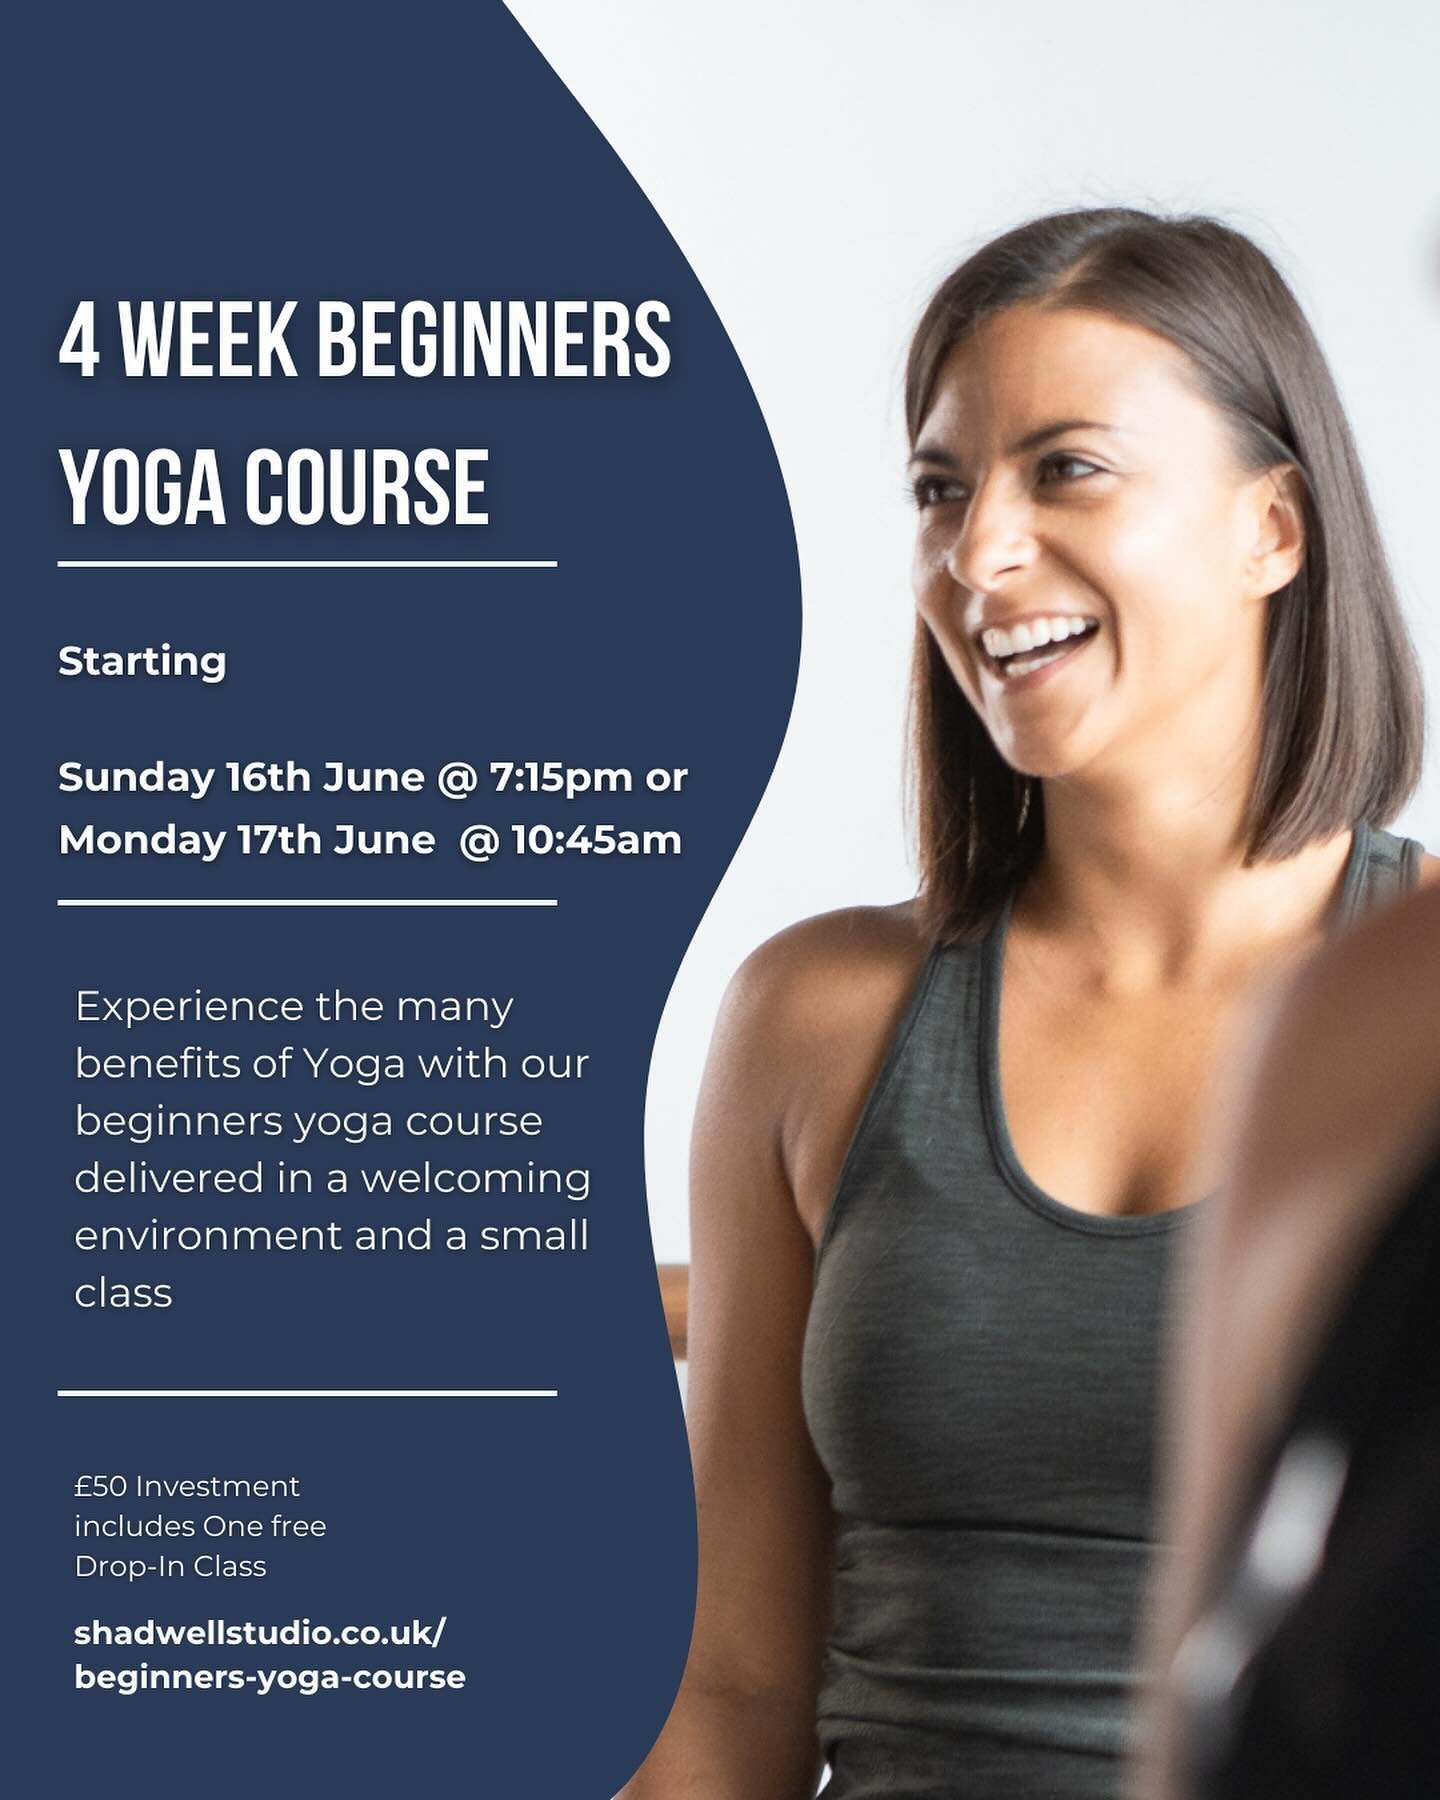 Beginners Yoga Course. Are you ready to prioritise your wellbeing?

We know it can be challenging to start something new and walk into a studio you&rsquo;ve never been to. 

But know you will be welcomed with a big smile and kindness. 

If you have a